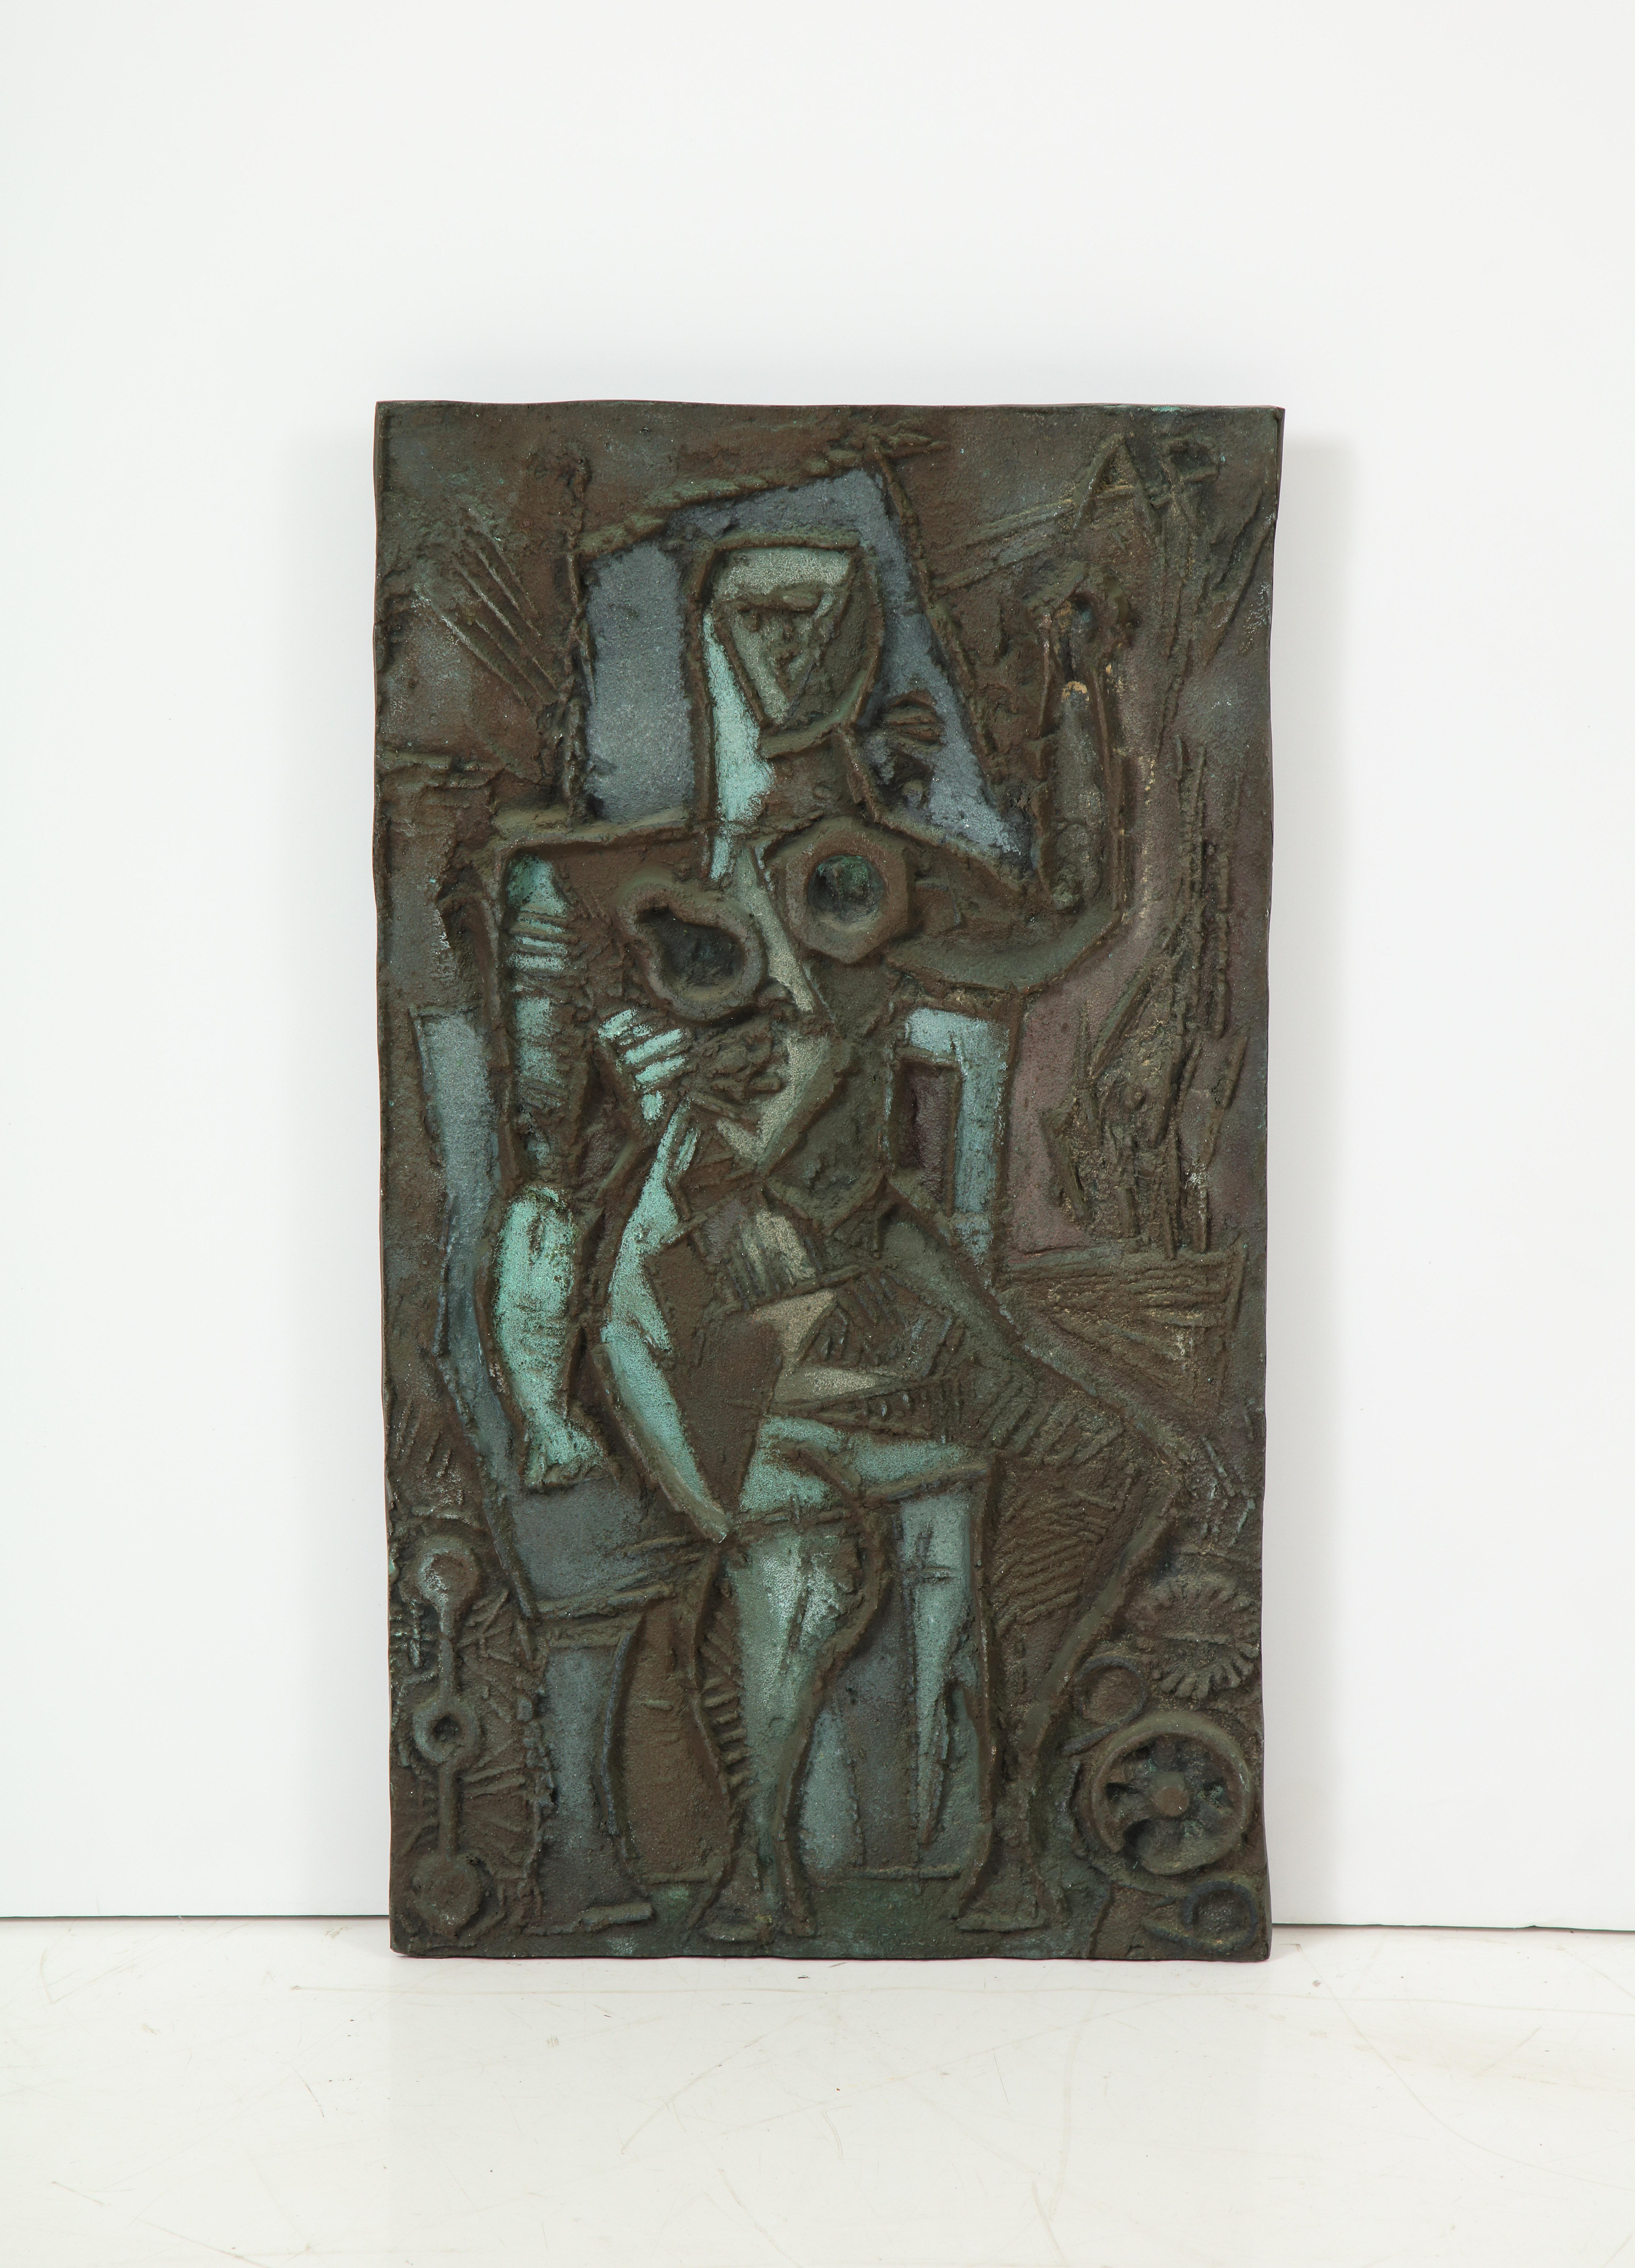 Abstract cast bronze wall relief with a figural motif by Chicago artist Abbott Pattison (1916-1999). After receiving his B.F.A. from Yale in 1939 and a stint in the Navy, Pattison returned to his native Chicago. From the 1950s through the 1970s, he